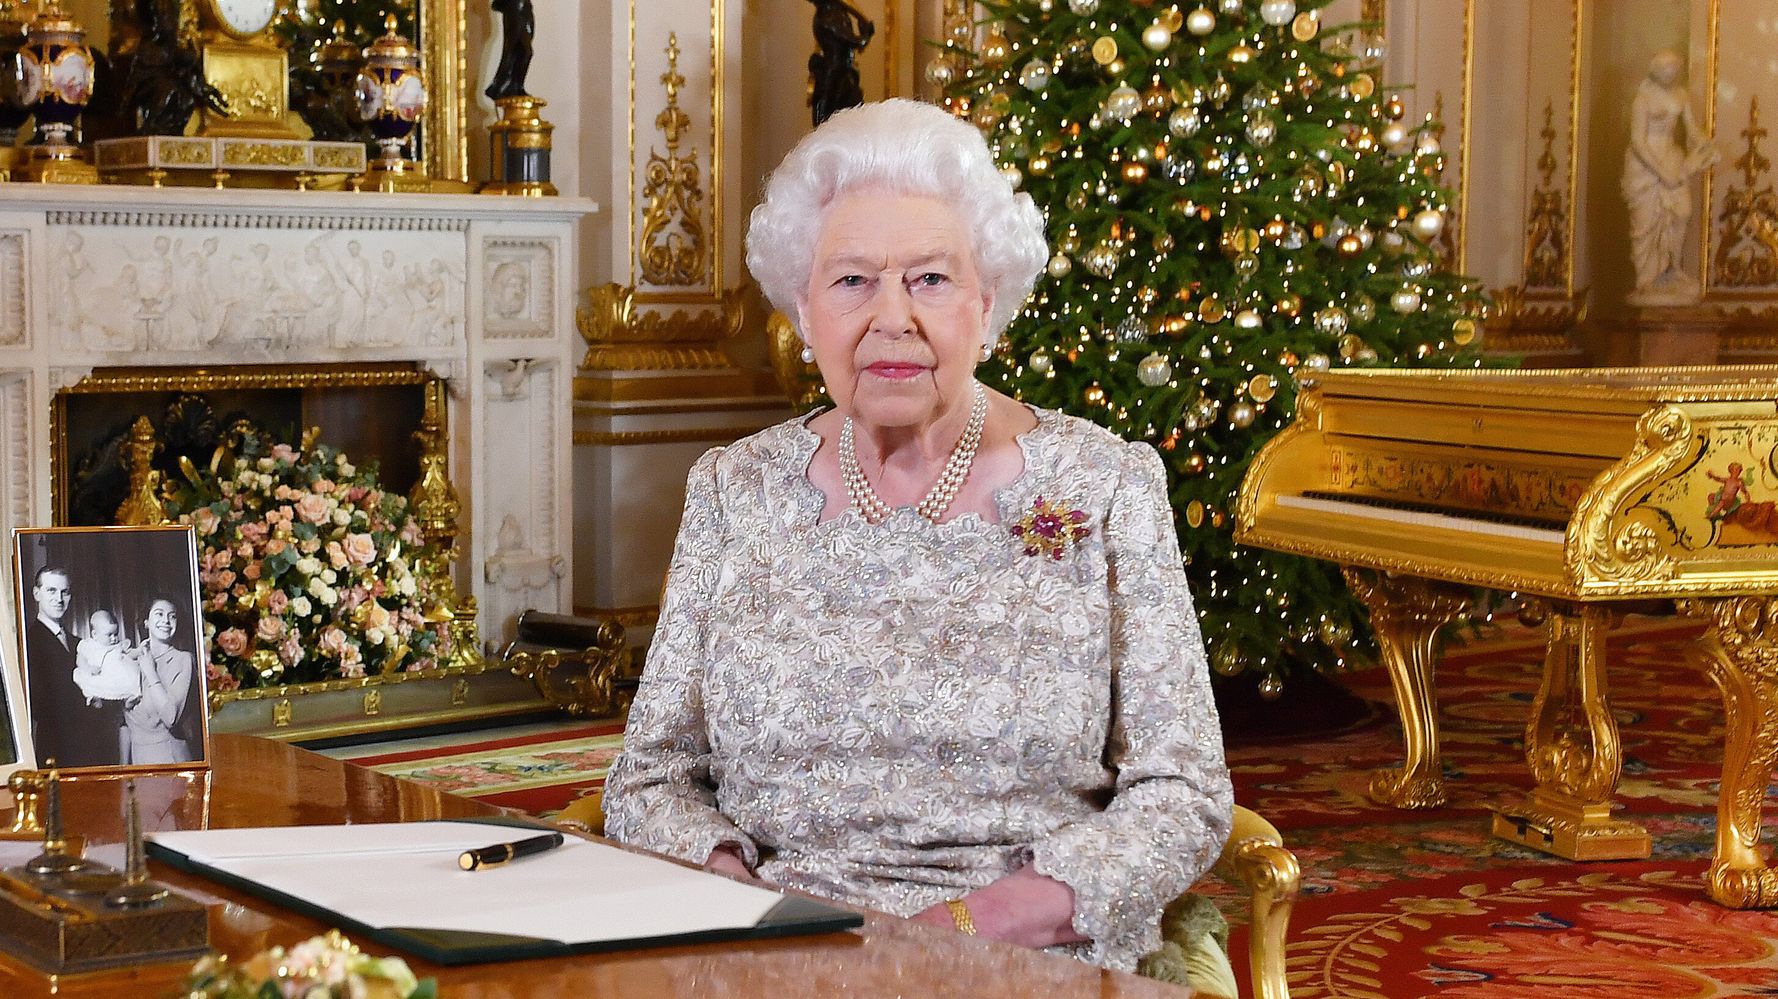 Queen Elizabeth To Spend Christmas At Windsor Amid COVID-19 Pandemic